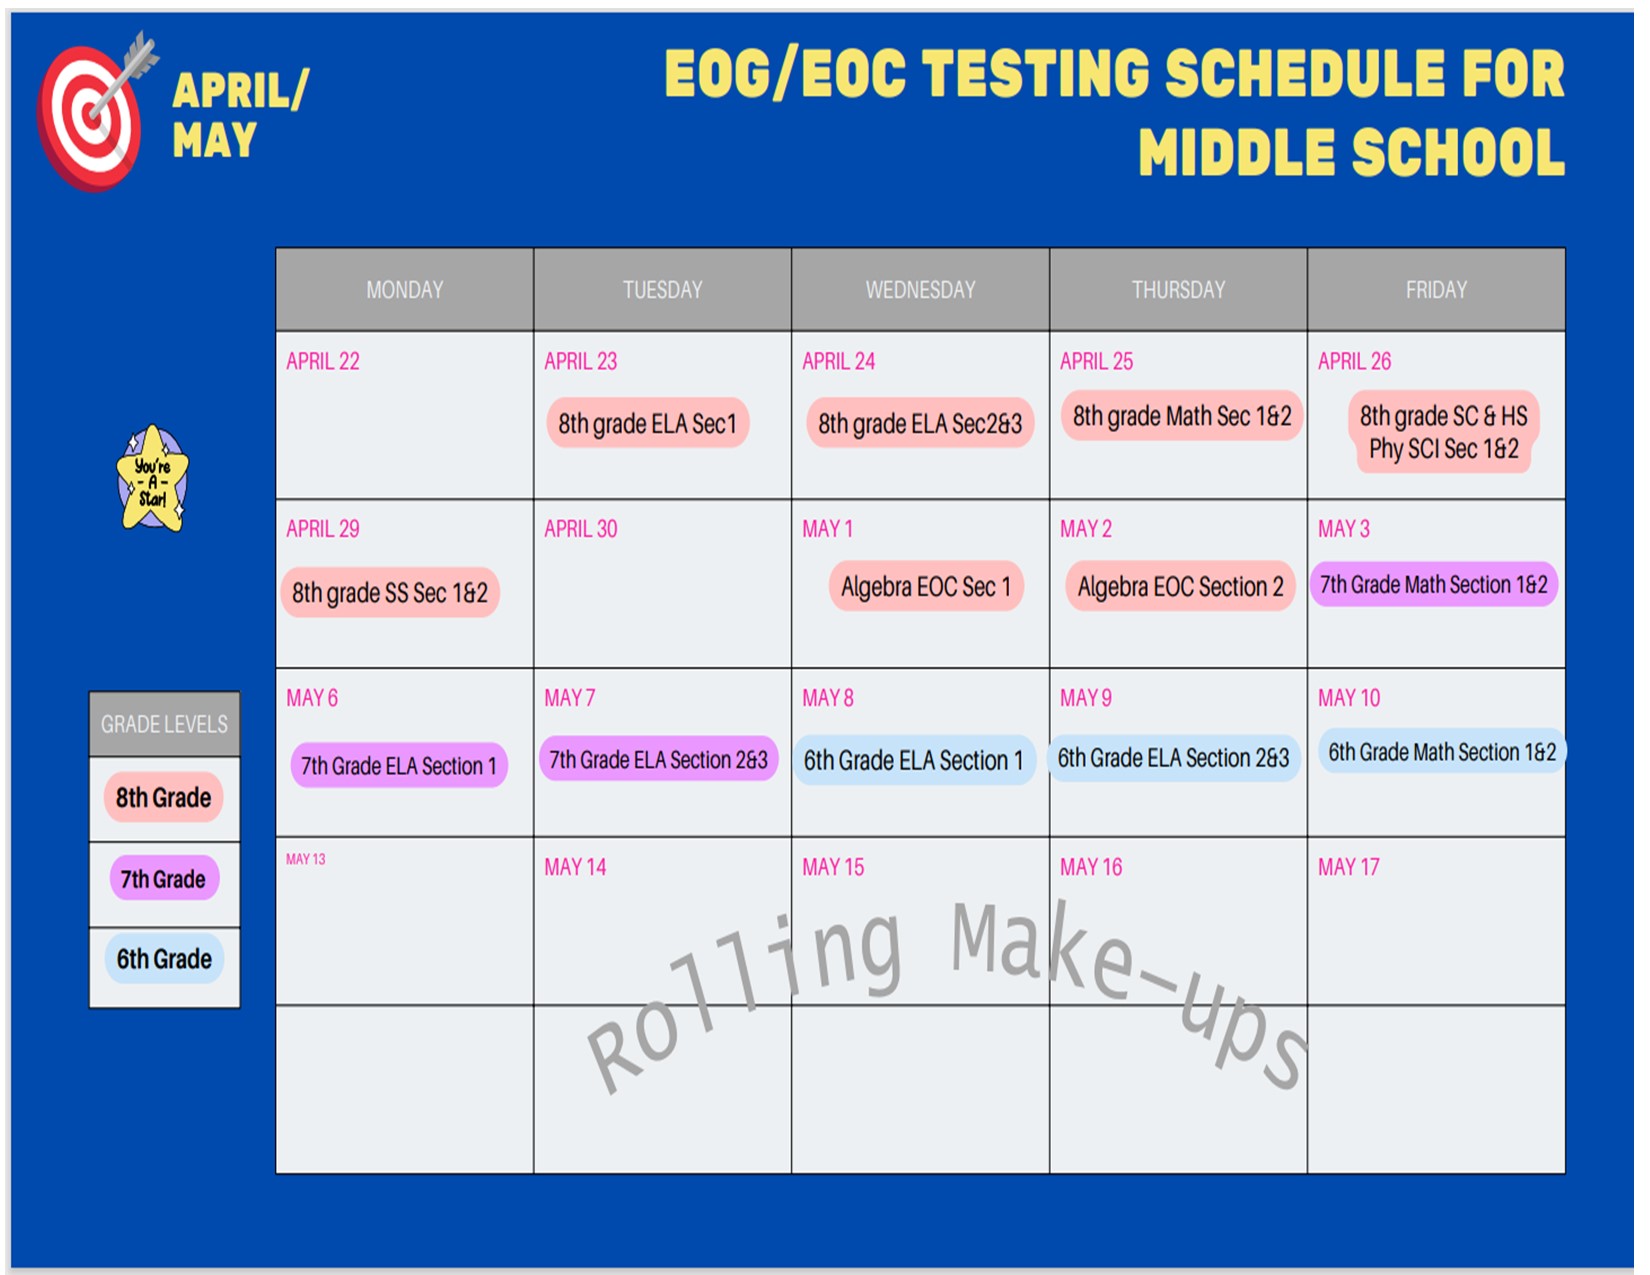 eog testing schedule for middle school.jpg